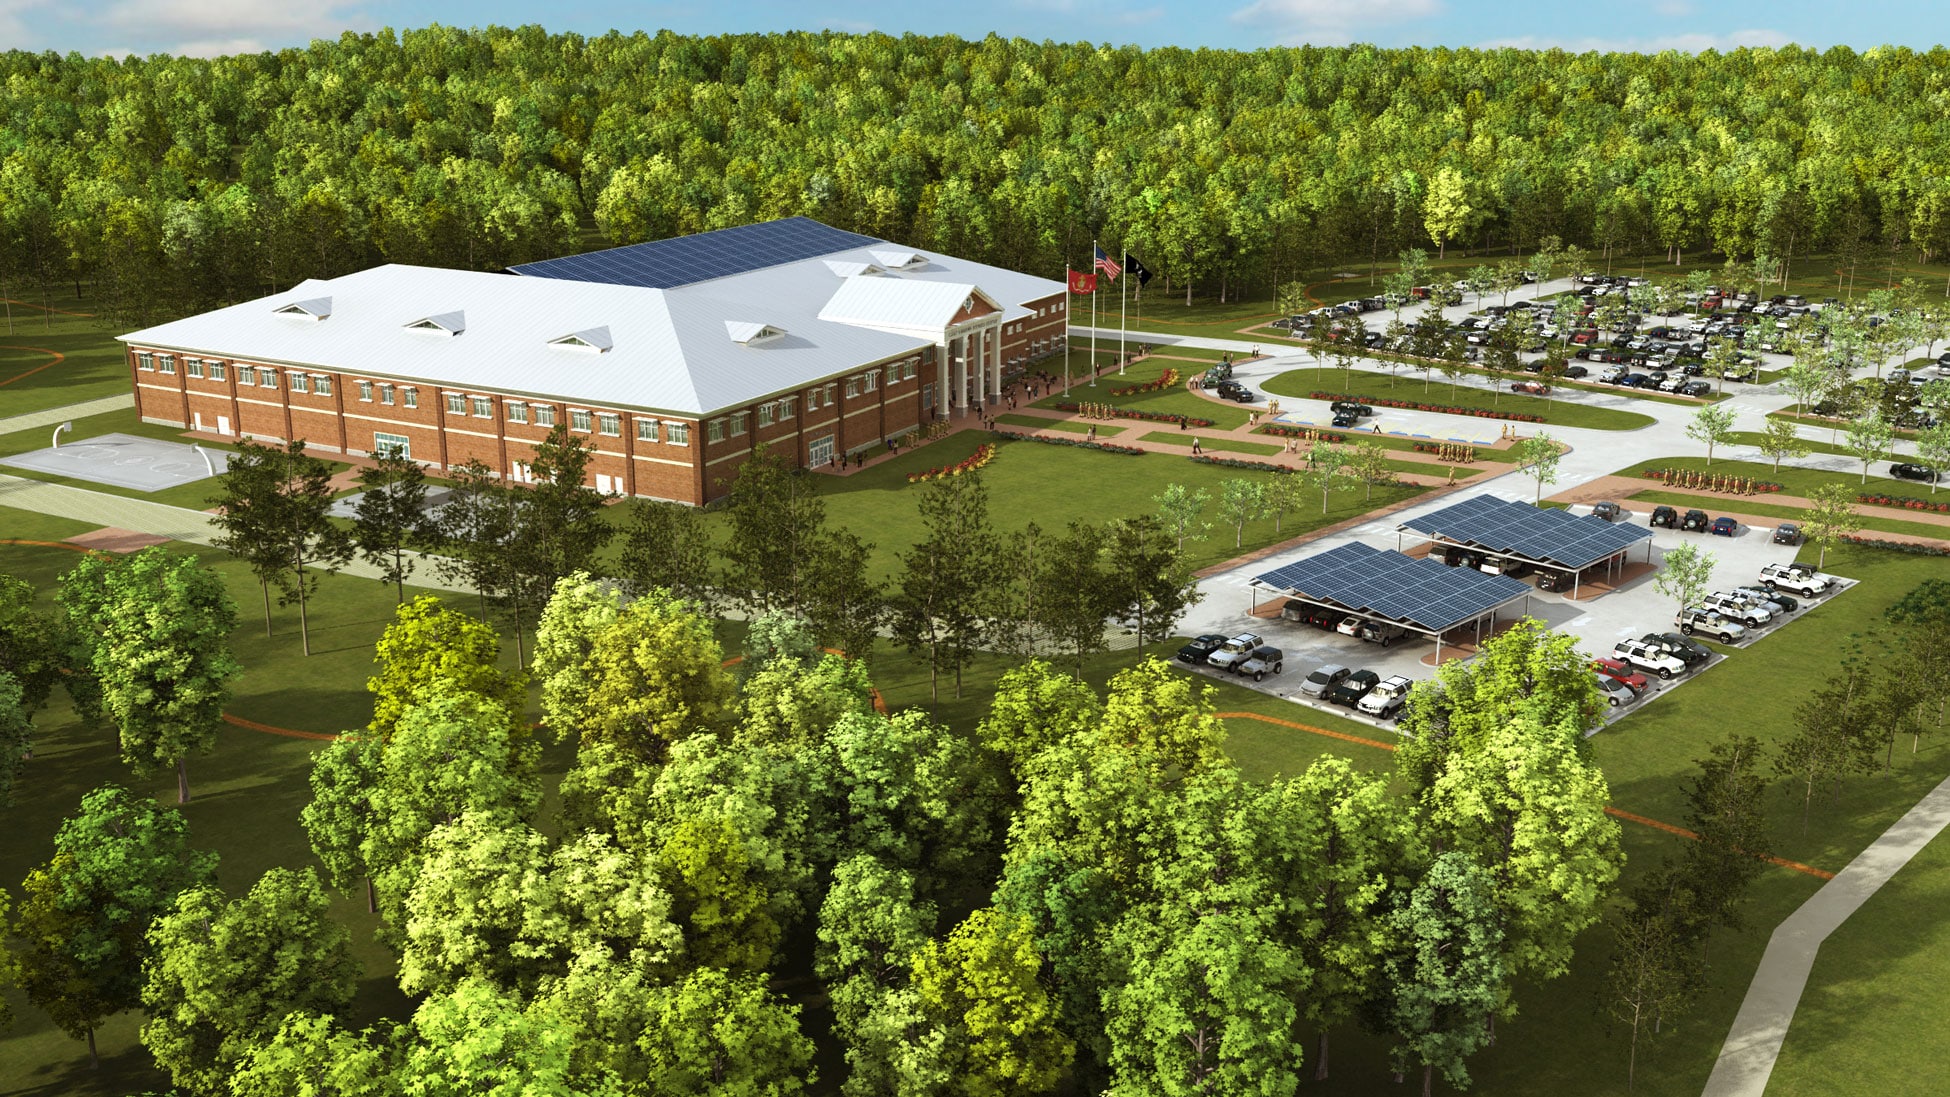 Kimley-Horn provided civil engineering and landscape architecture services for the Camp Lejeune Physical Fitness Center in Jacksonville, North Carolina.